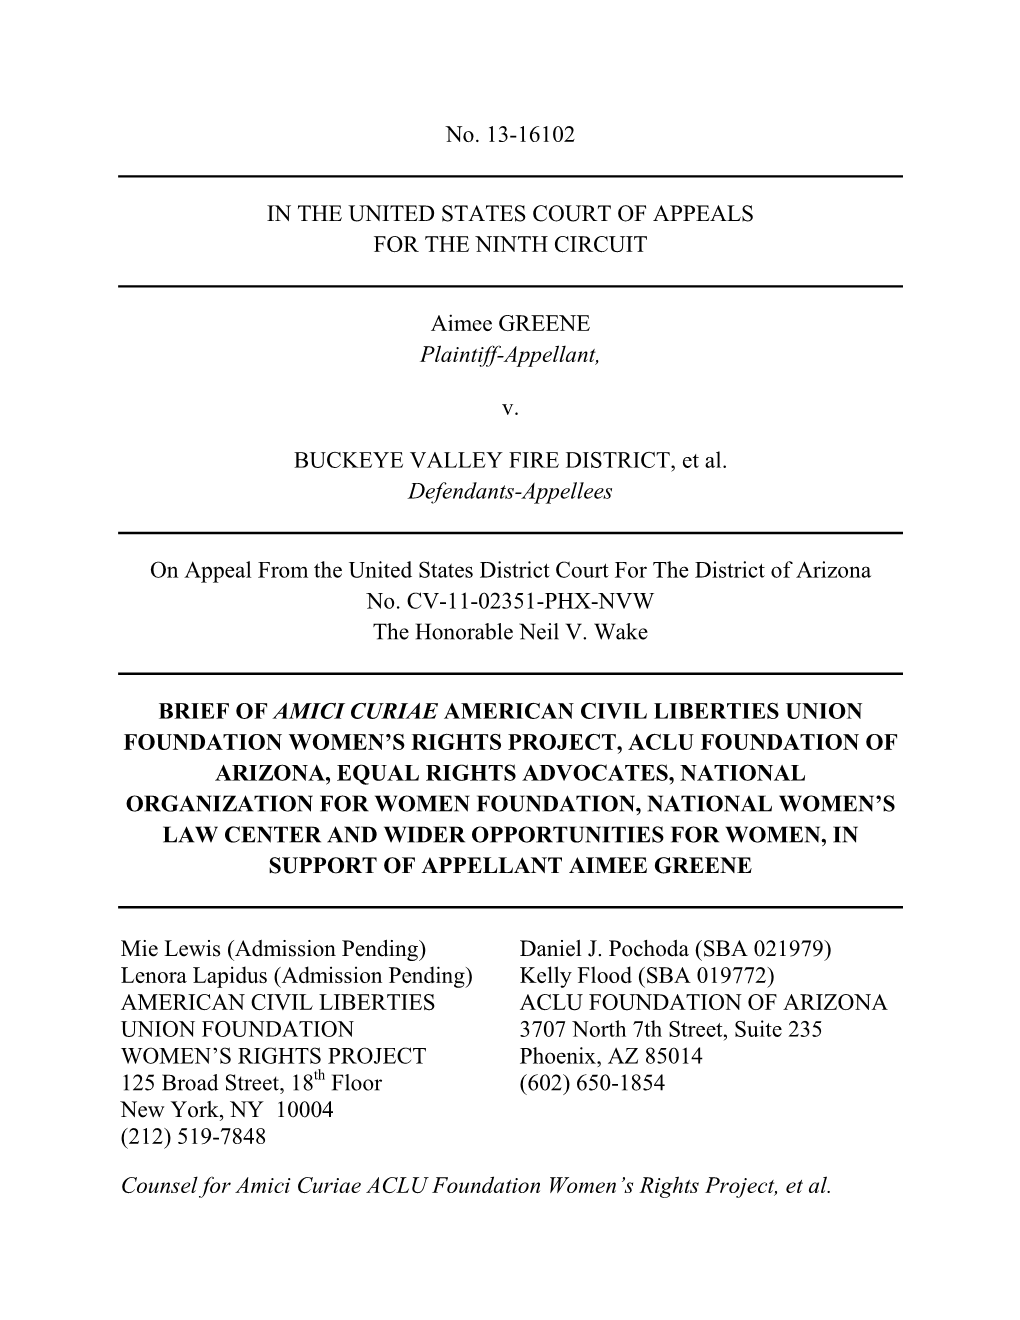 No. 13-16102 in the UNITED STATES COURT of APPEALS